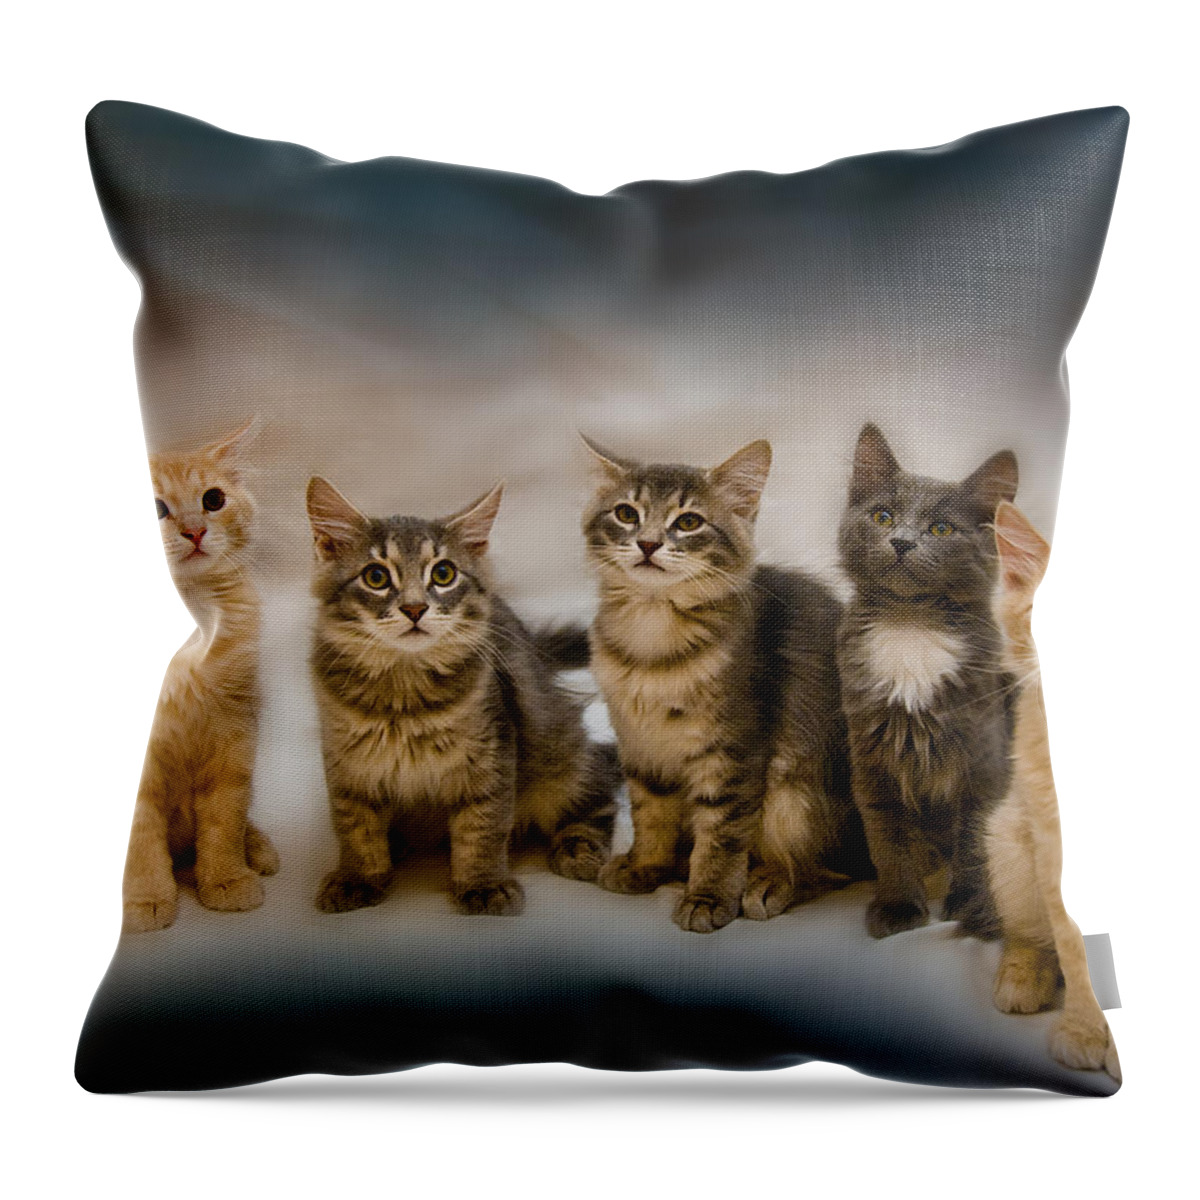 The Gang Throw Pillow featuring the photograph The Gang by Steven Richardson